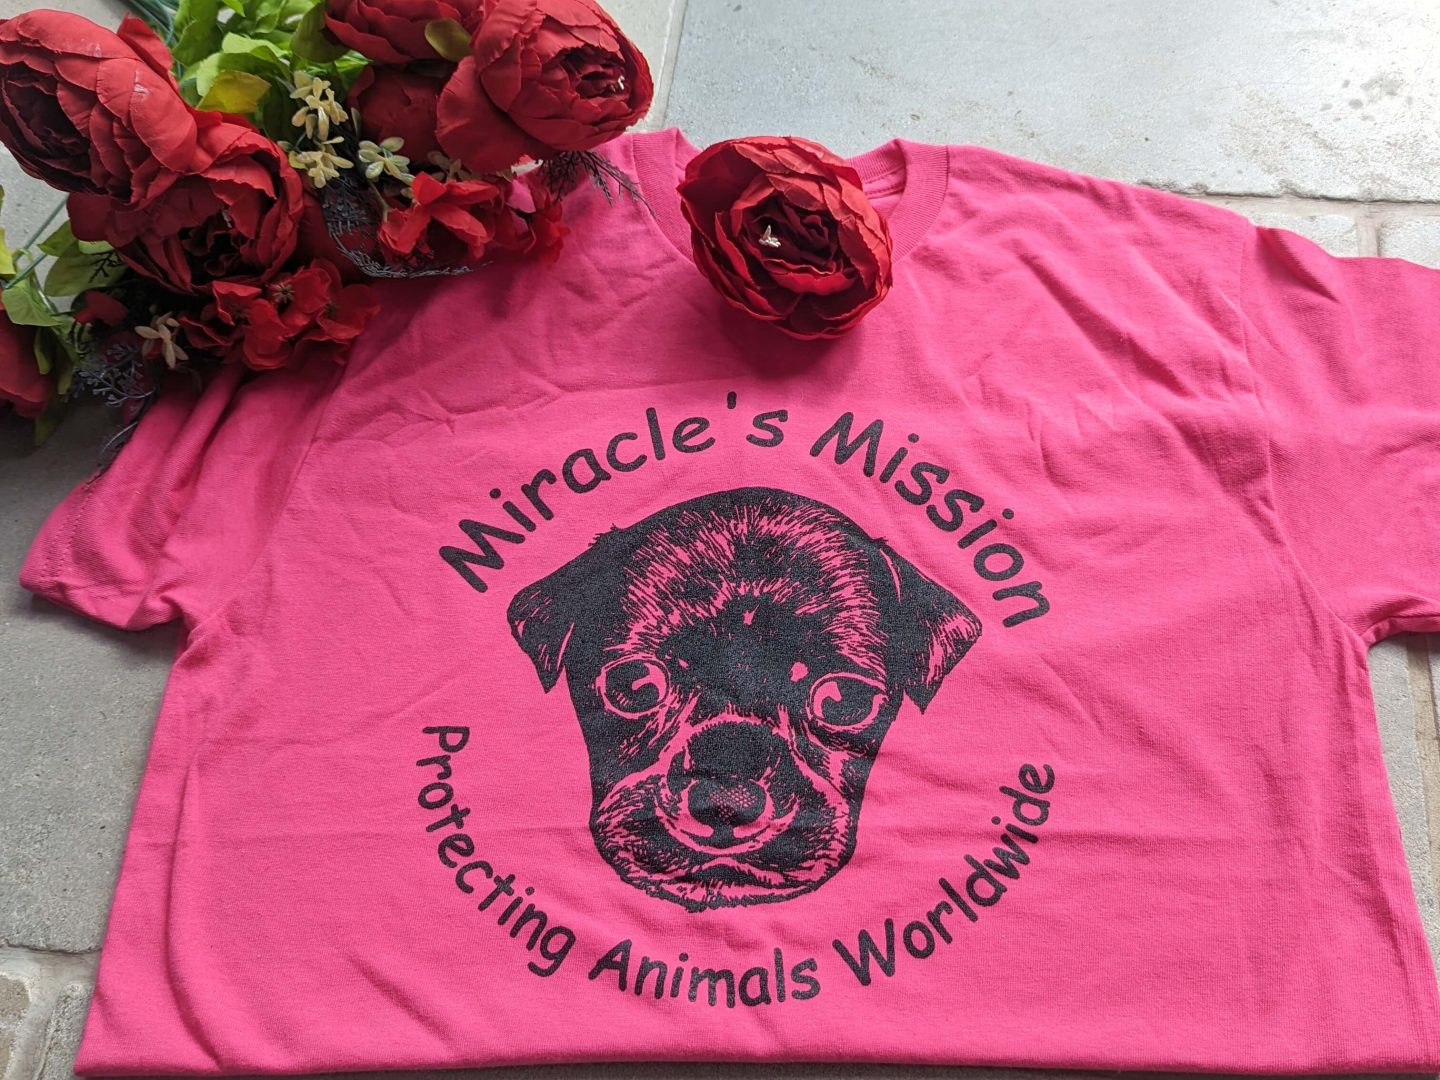 Miracles mission charity t-shirt in bright pink with a picture of a dog on the front displayed beside red flowers on a tiled background